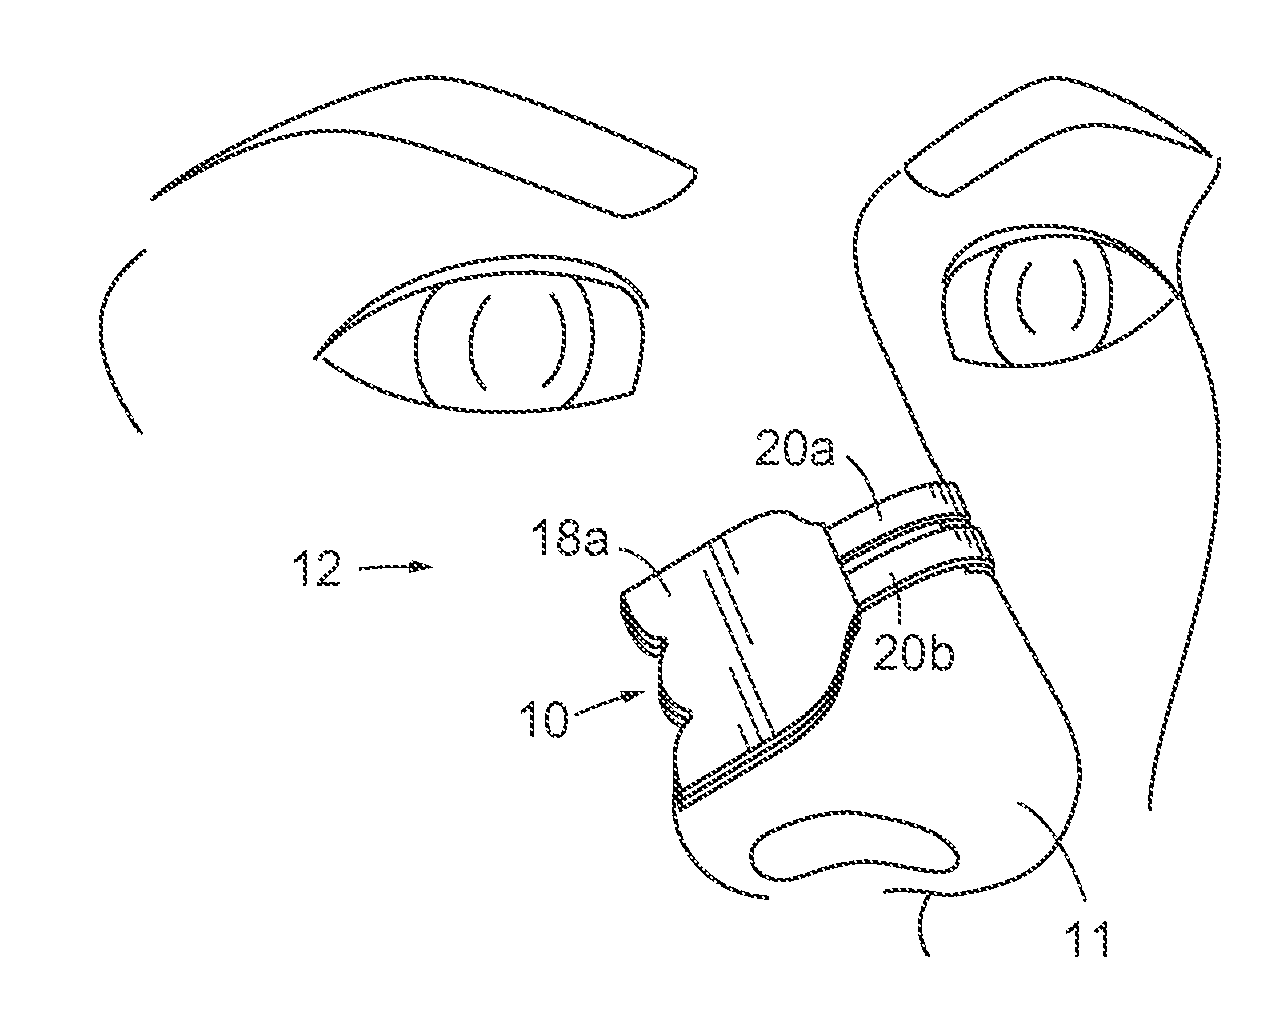 Economical Nasal Dilator and Method of Manufacture